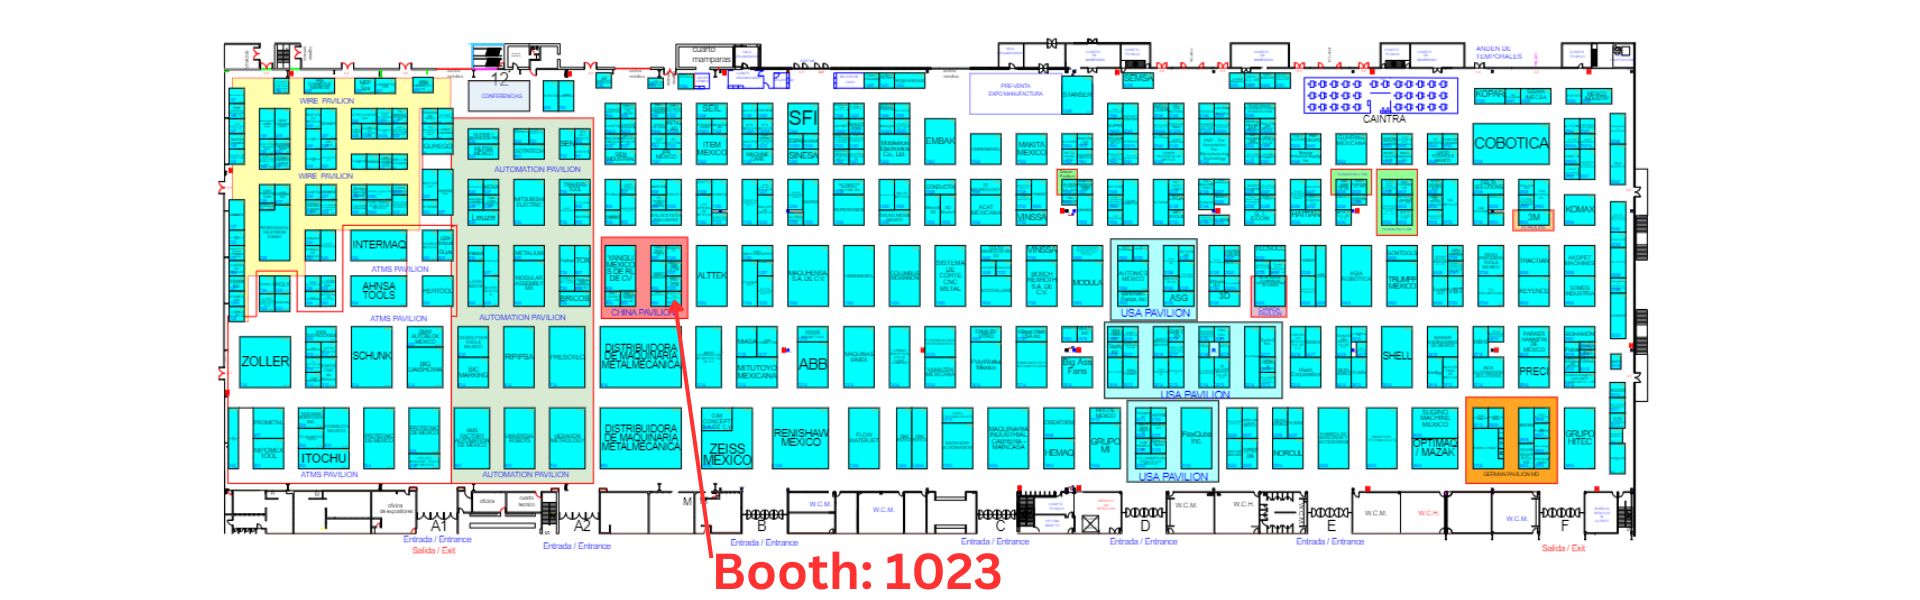 Booth 1023